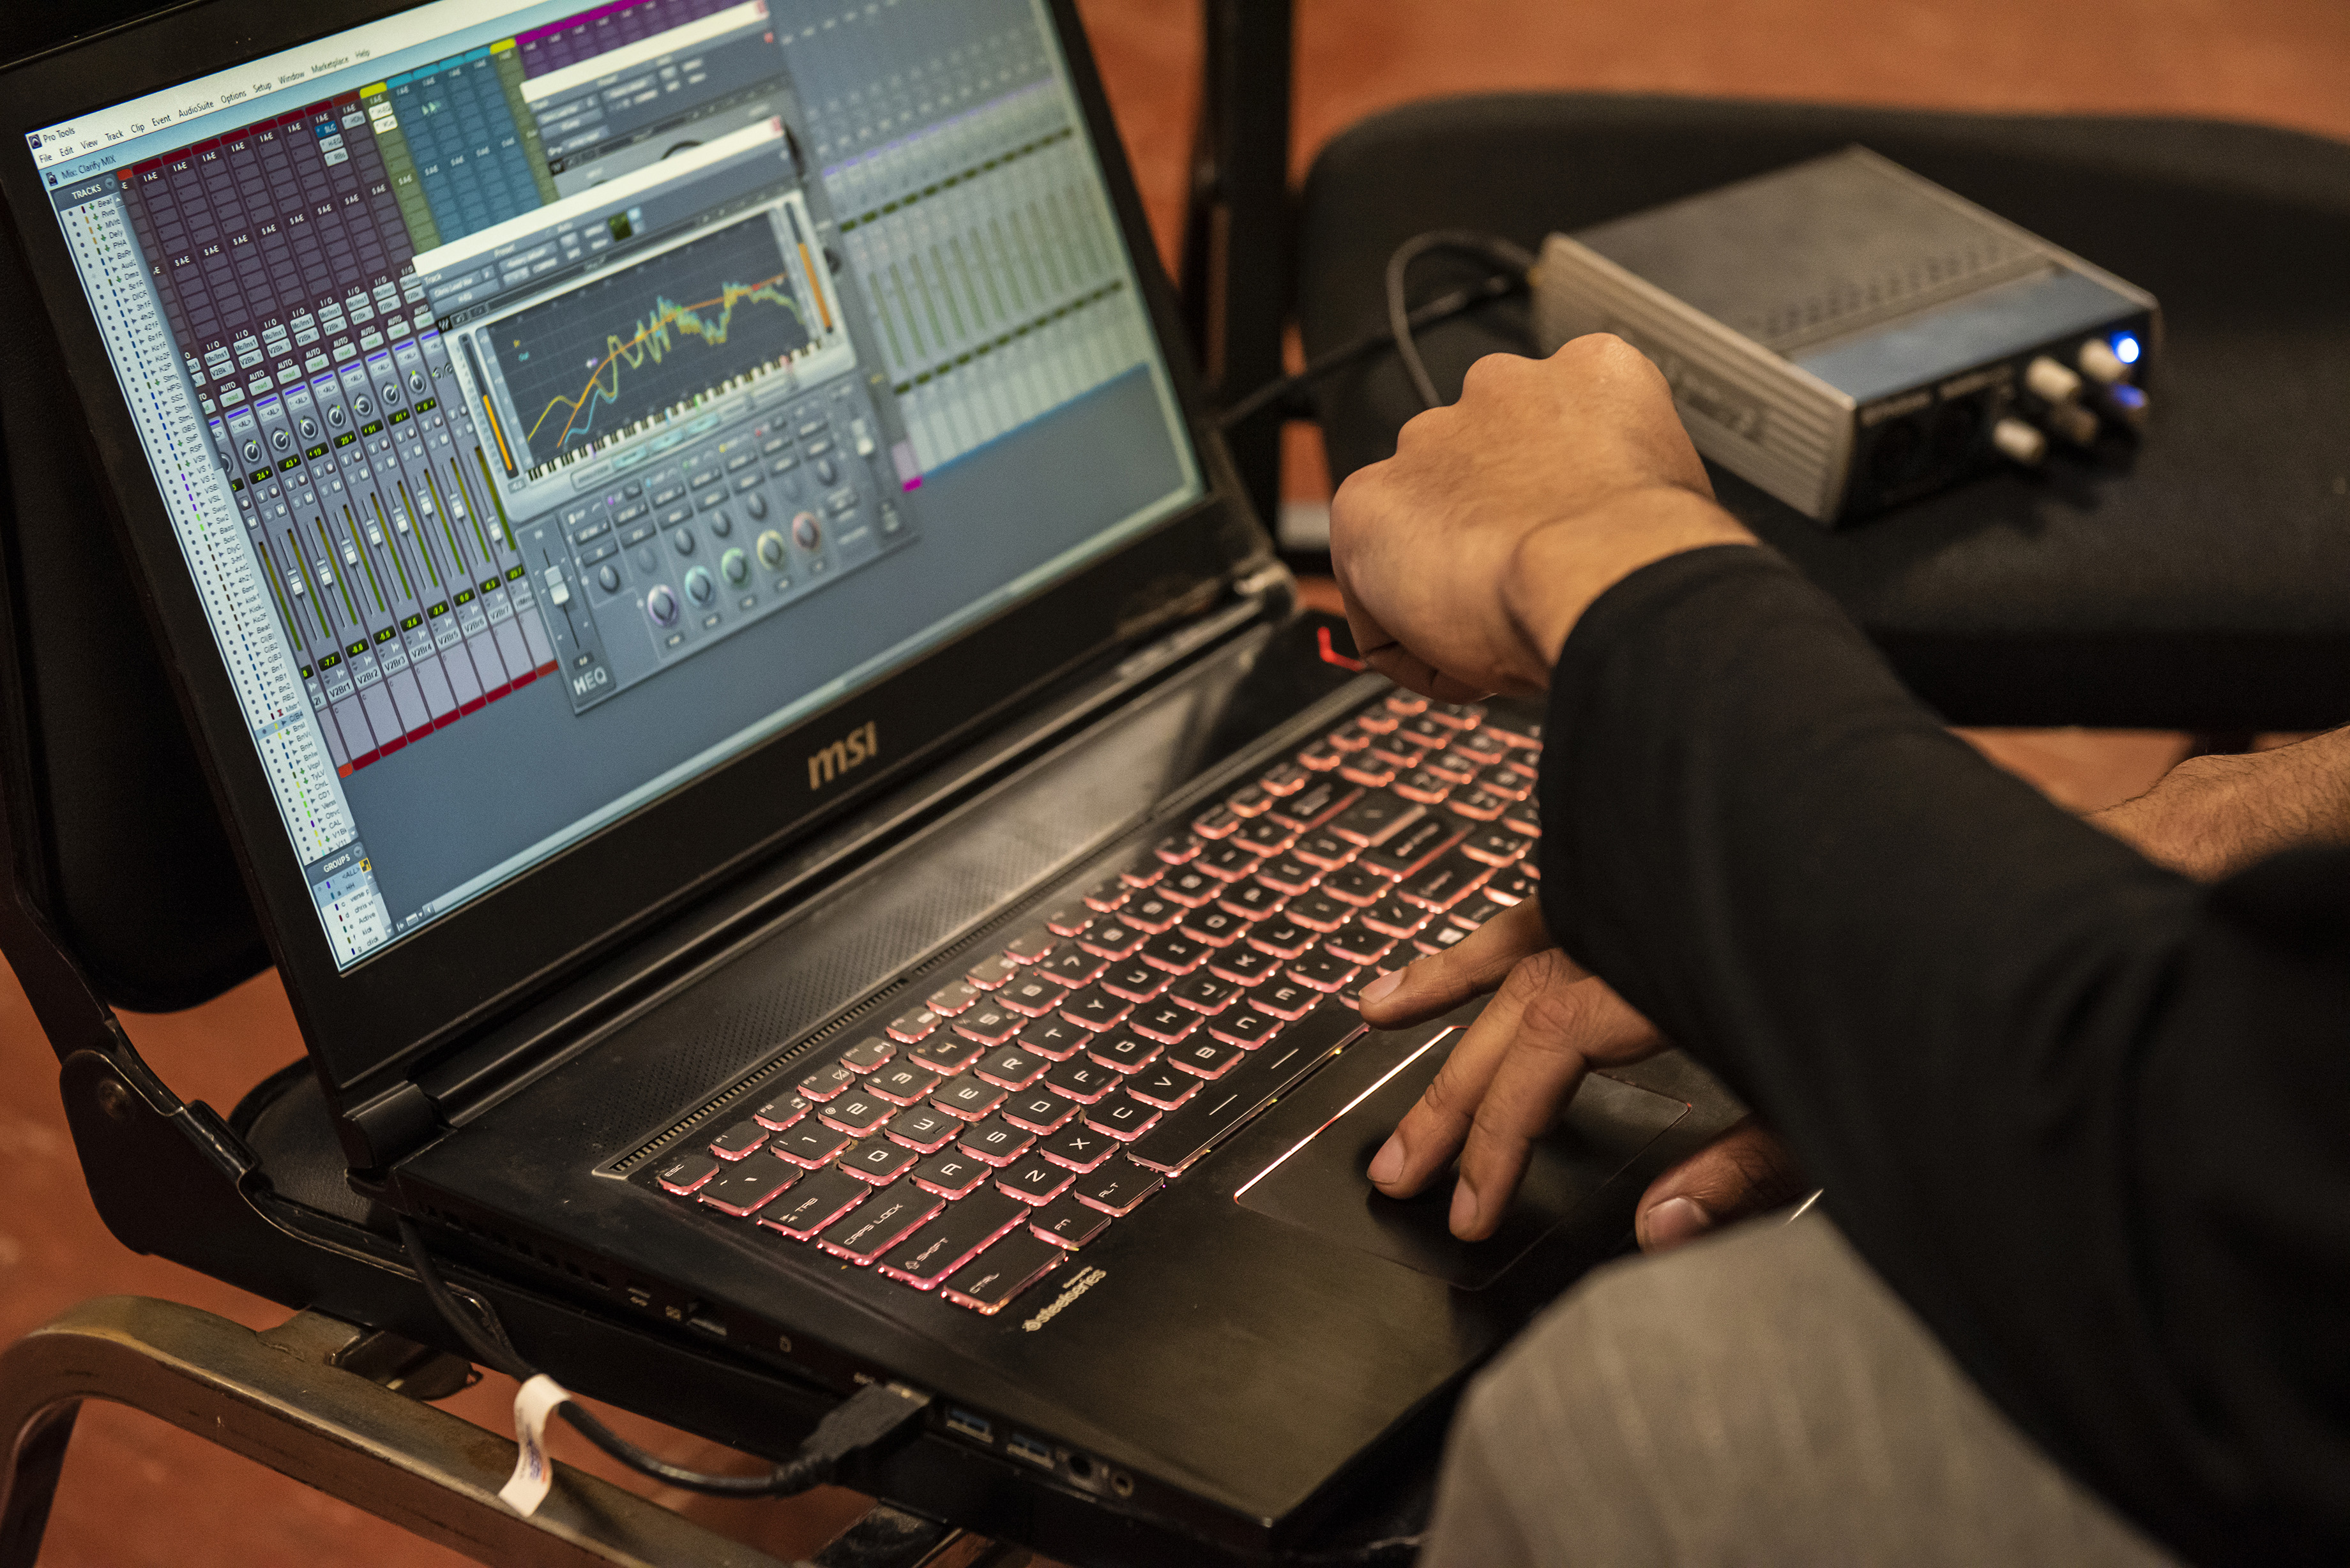 Audio mixing software on a laptop computer